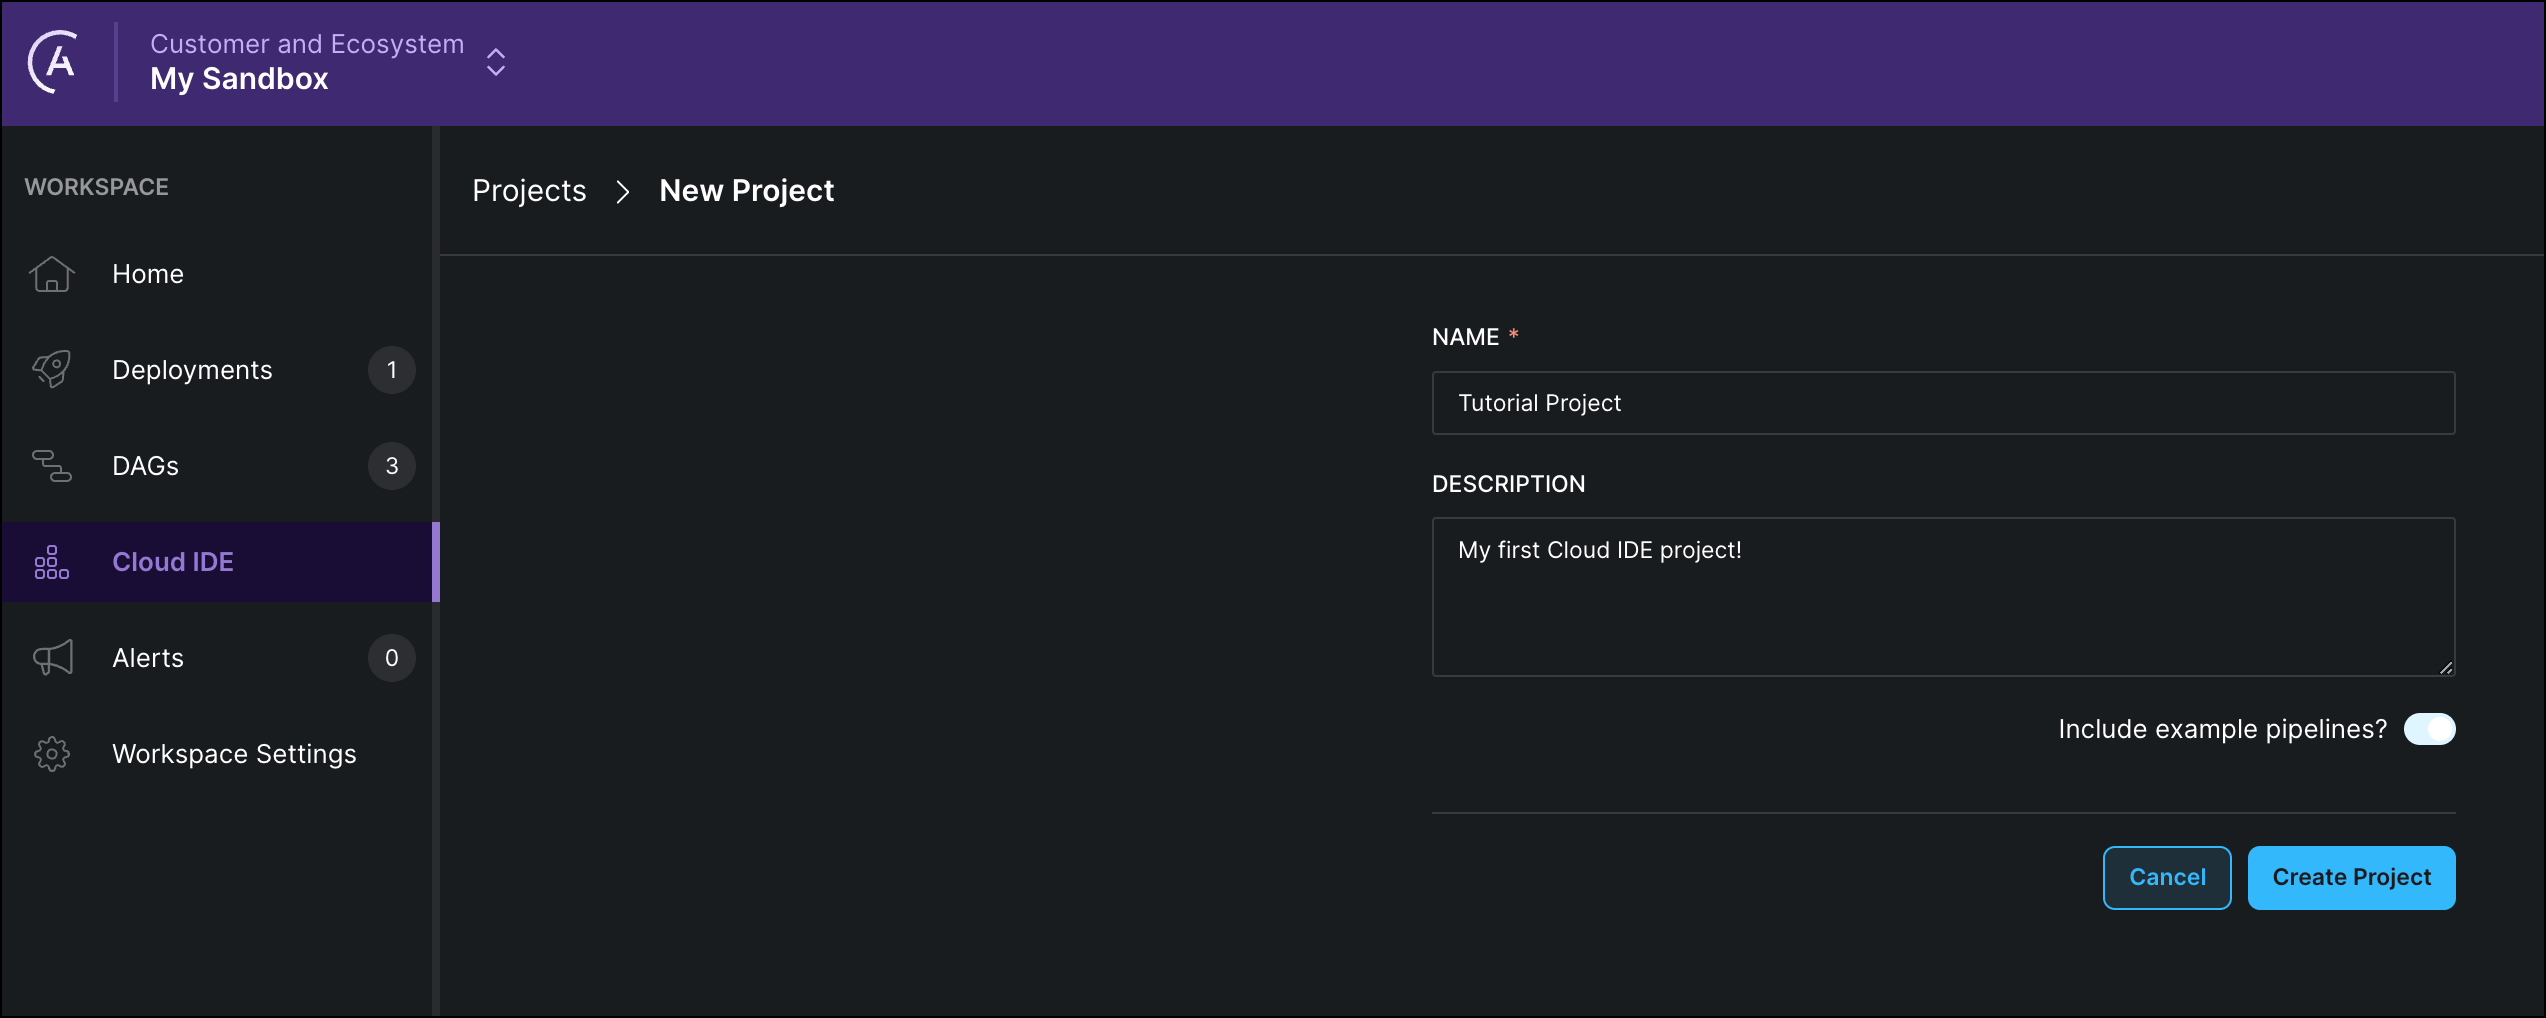 Screenshot of the Astro UI. New project creation dialogue, creating a project called tutorial project